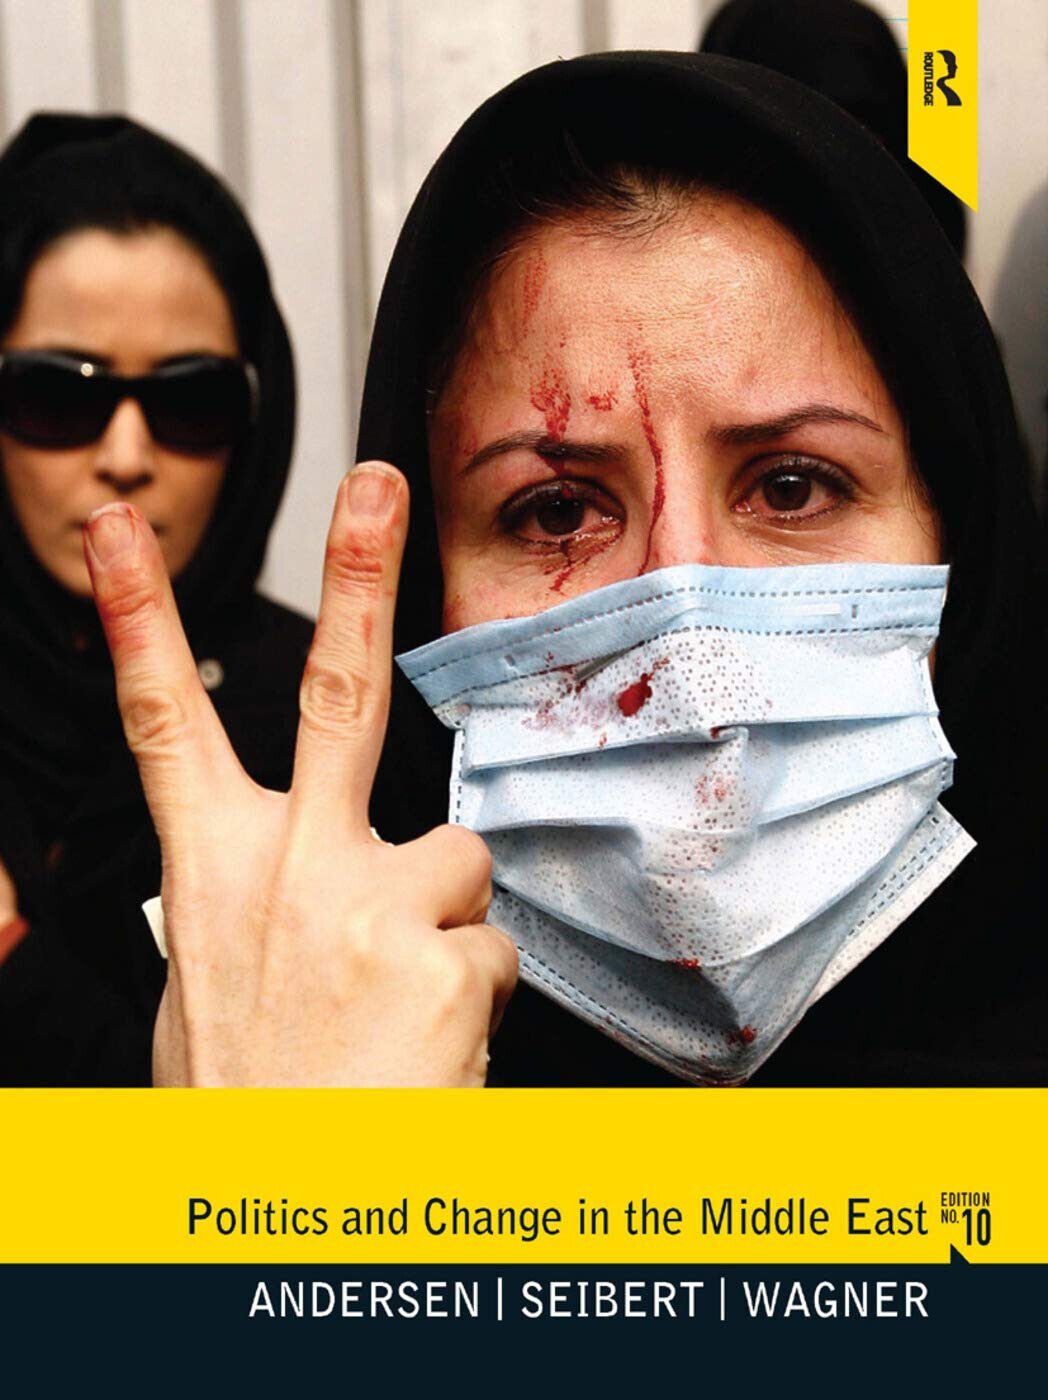 Politics and Change in the Middle East - Roy R. Anderson - Routledge, 2011 libro usato